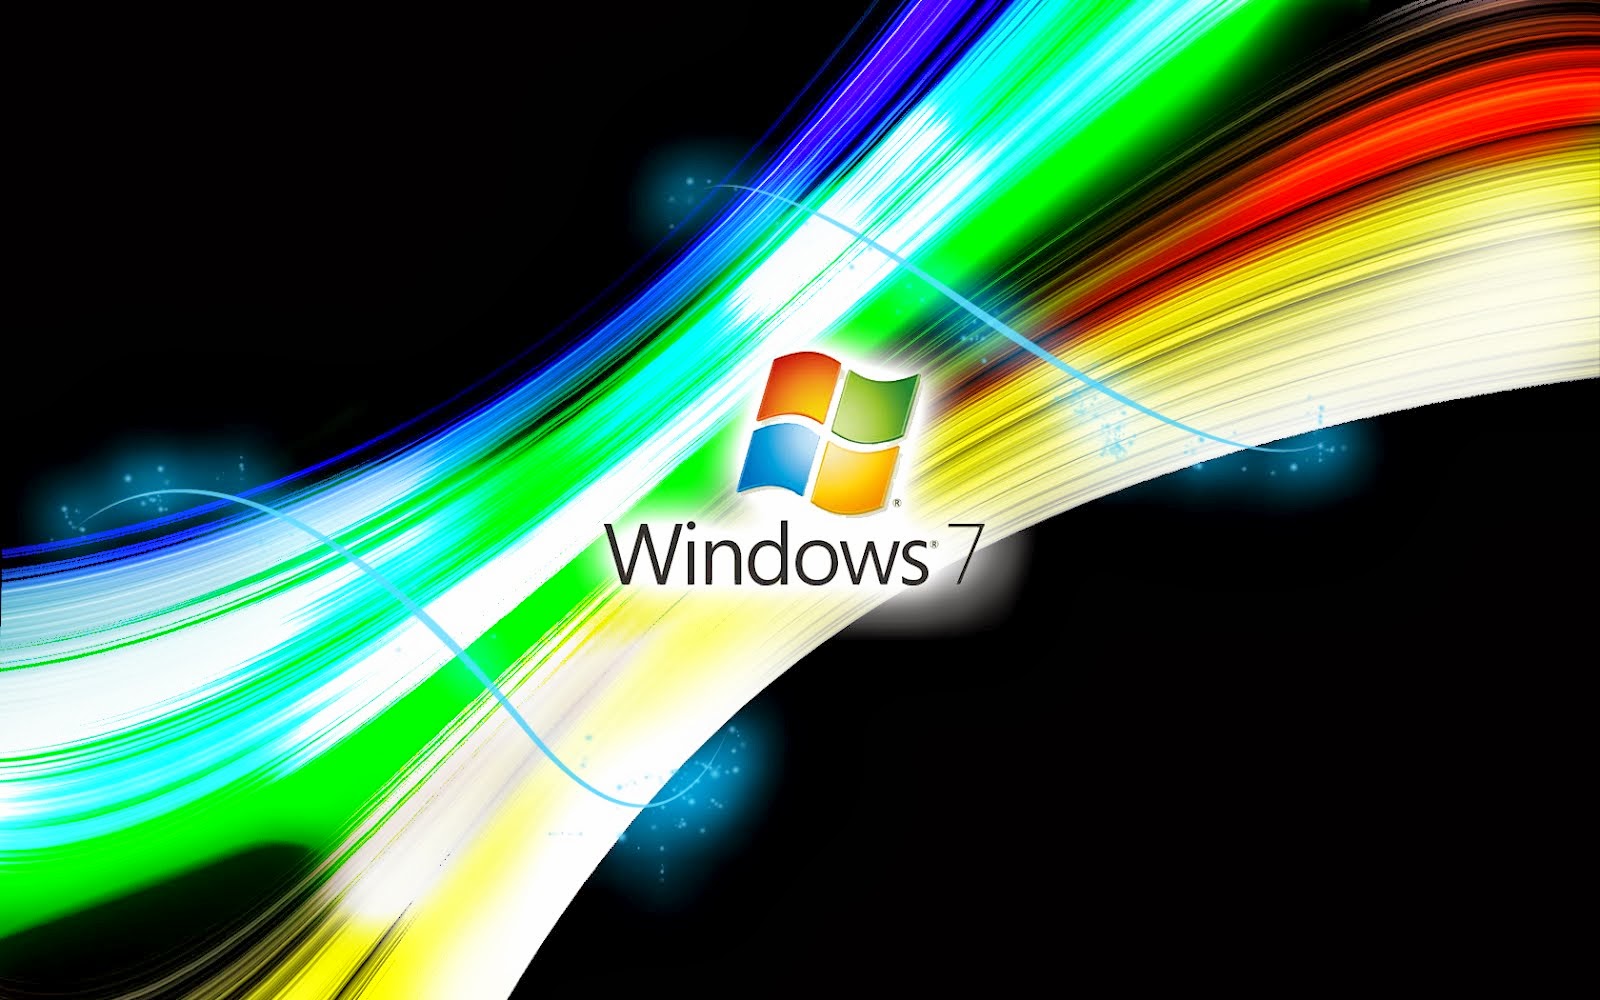 Free Animated Wallpaper For Windows 7 Wallpaper Animated 1600x1000